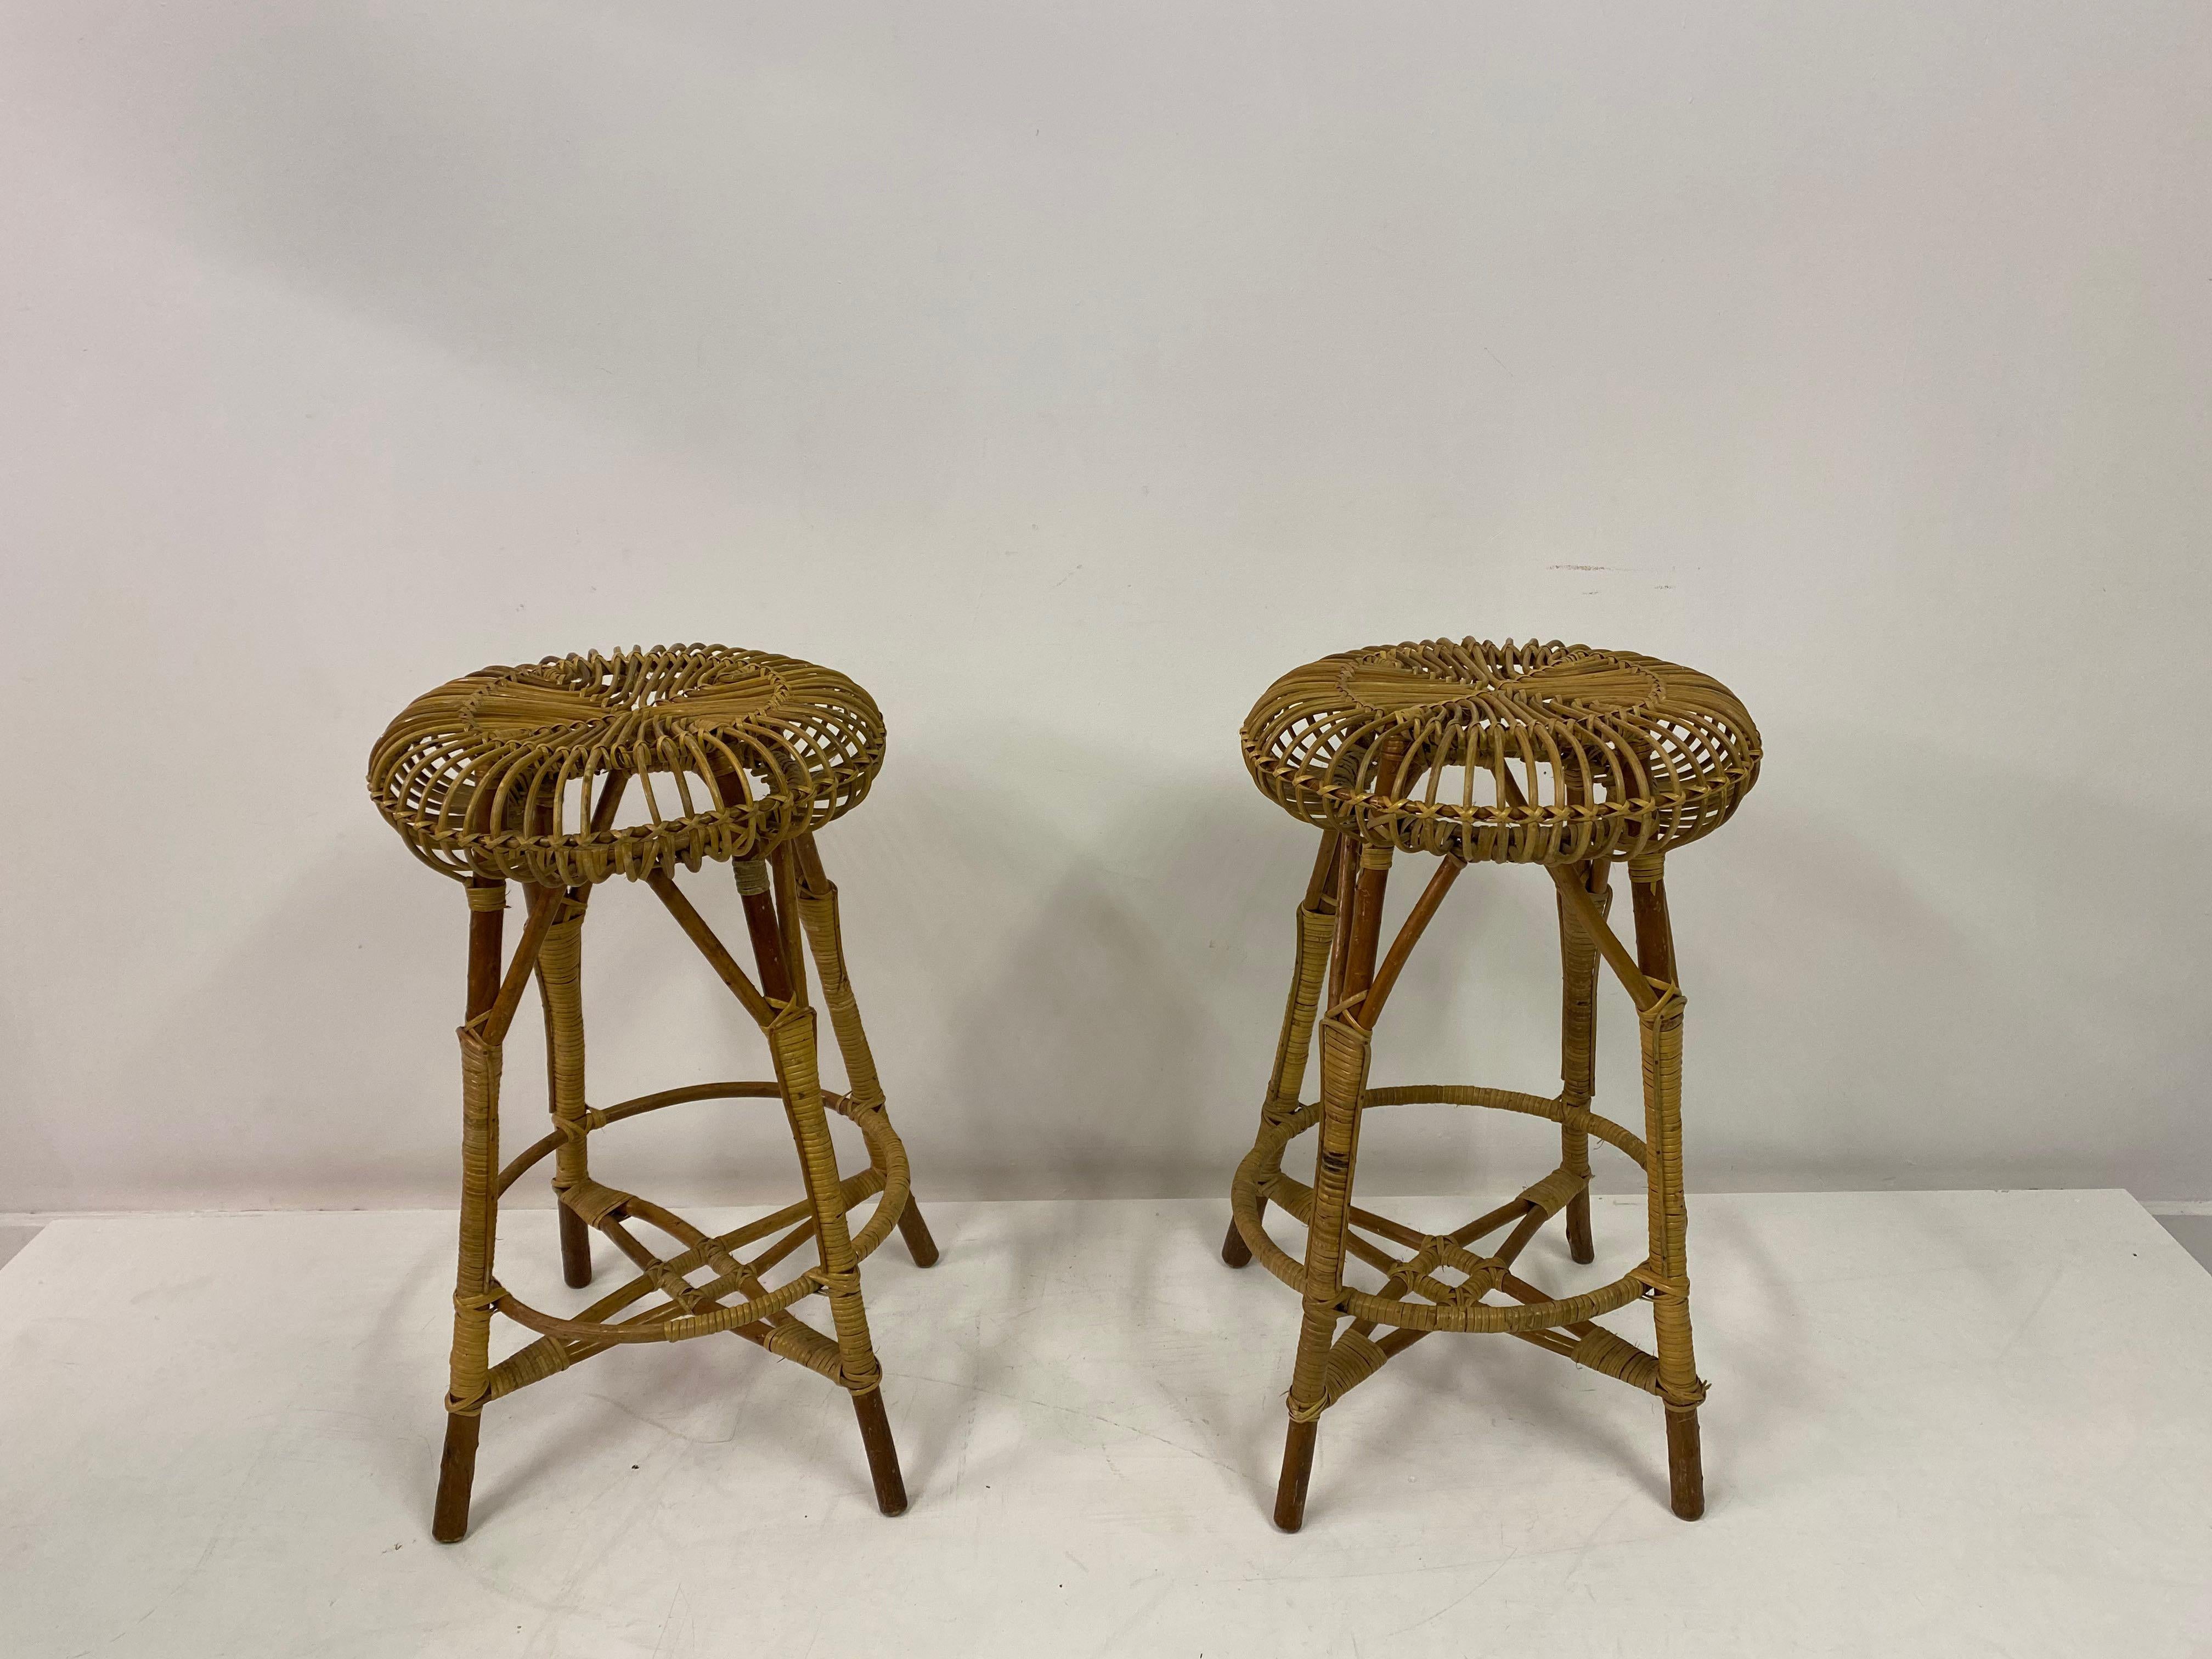 A pair of bar stools

Bamboo and wicker

Italian 1960s/1970s.